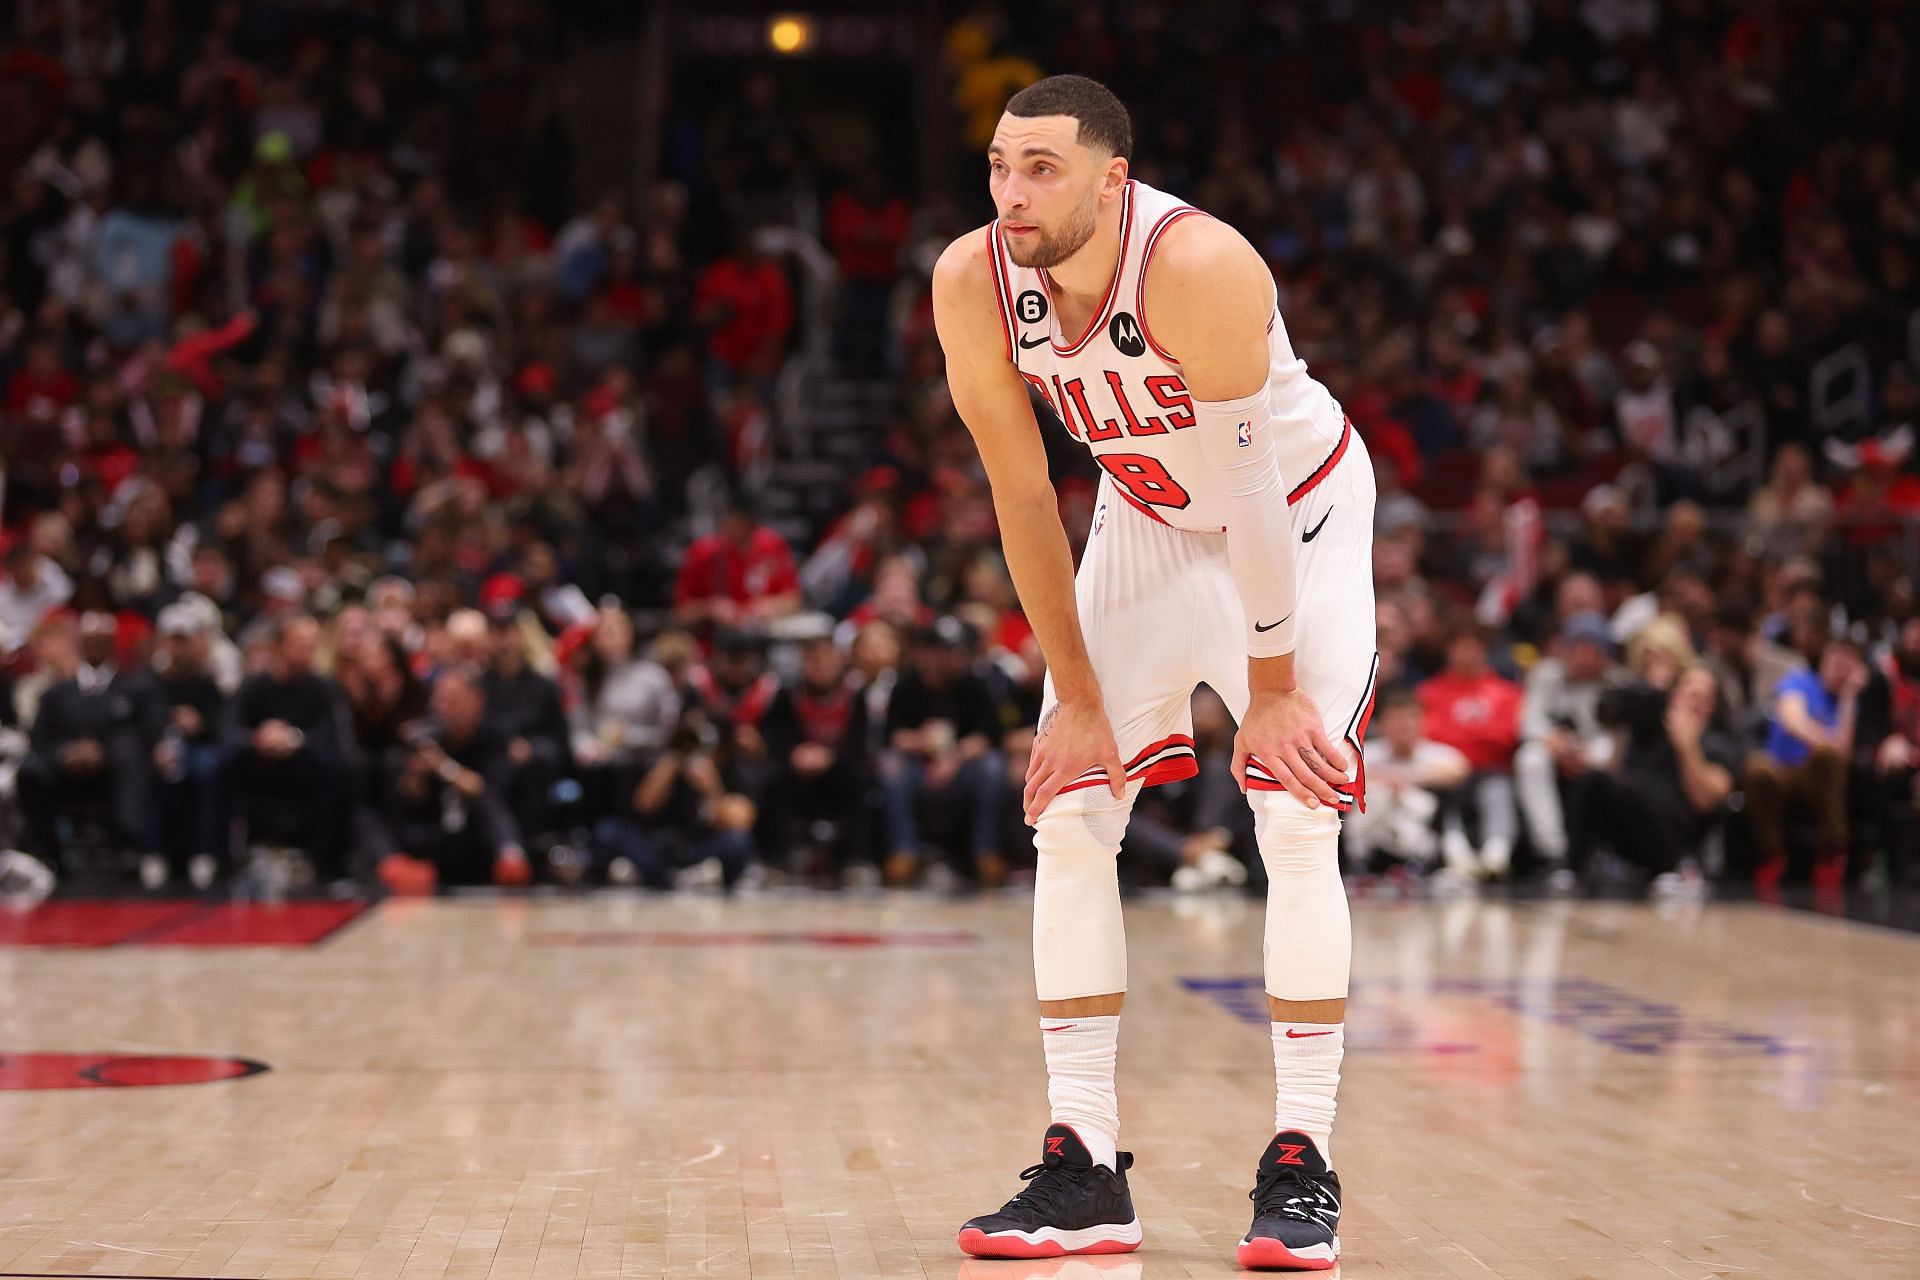 Bulls rookie Dalen Terry assigned to Windy City Bulls